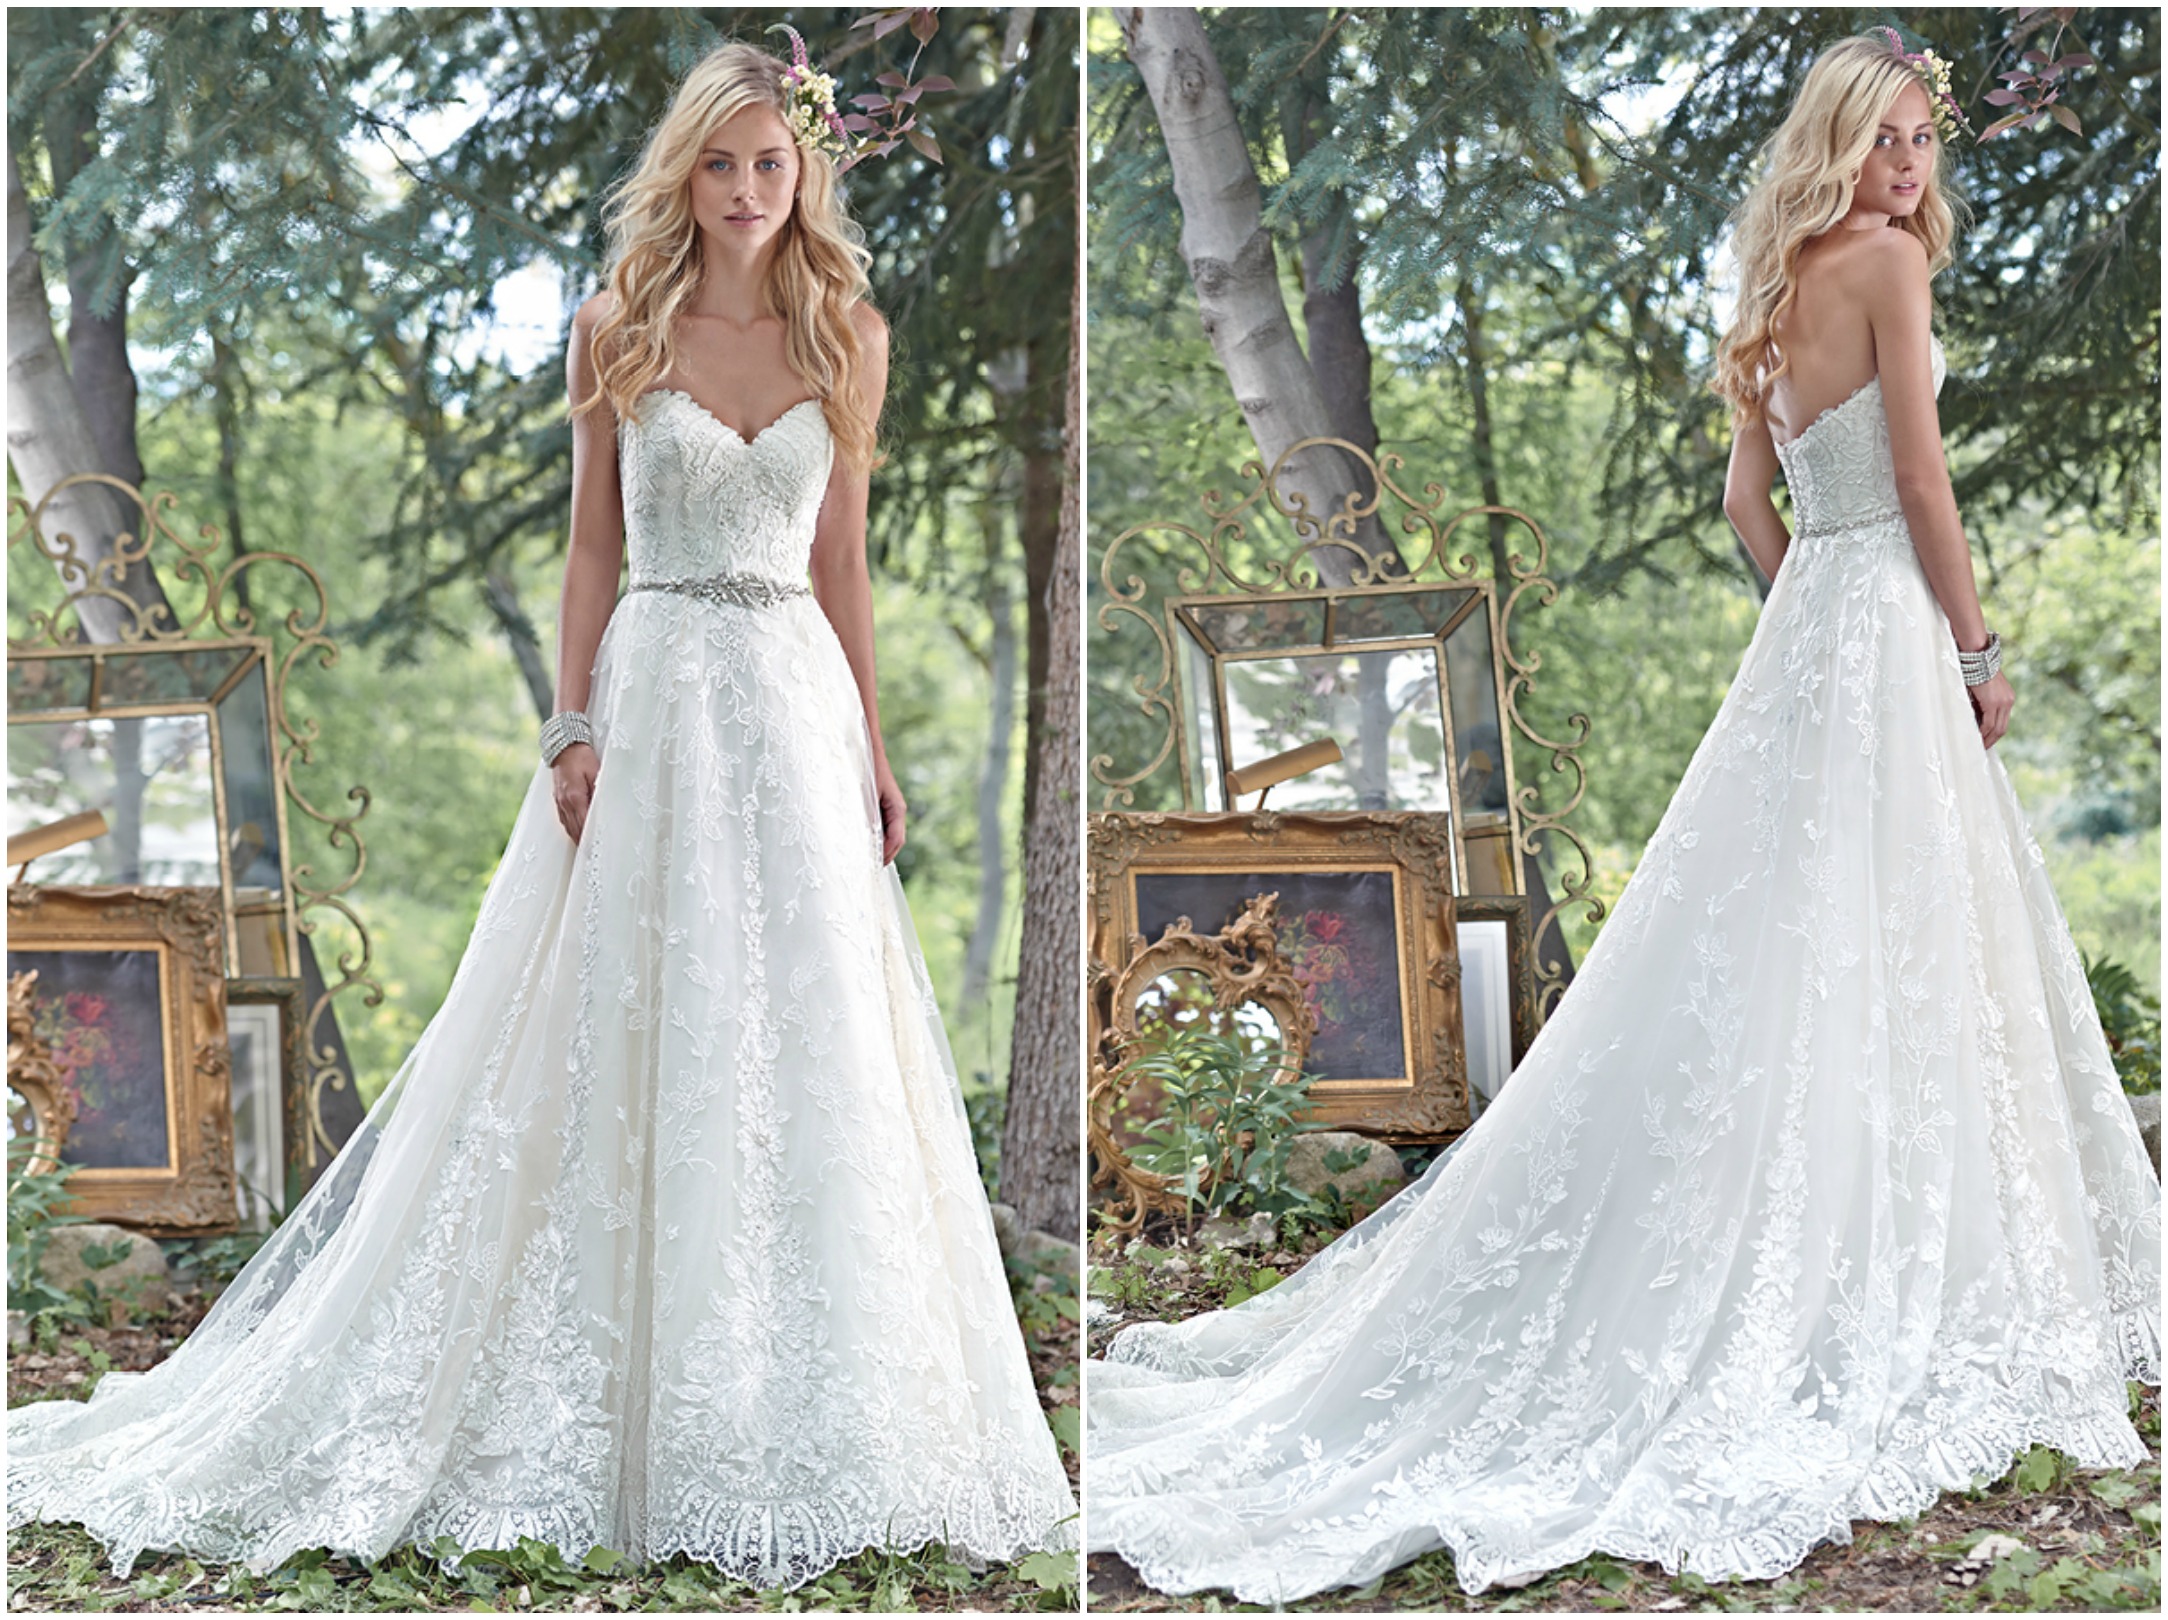 <a href="http://www.maggiesottero.com/maggie-sottero/luna/9519" target="_blank">Maggie Sottero Spring 2016</a>